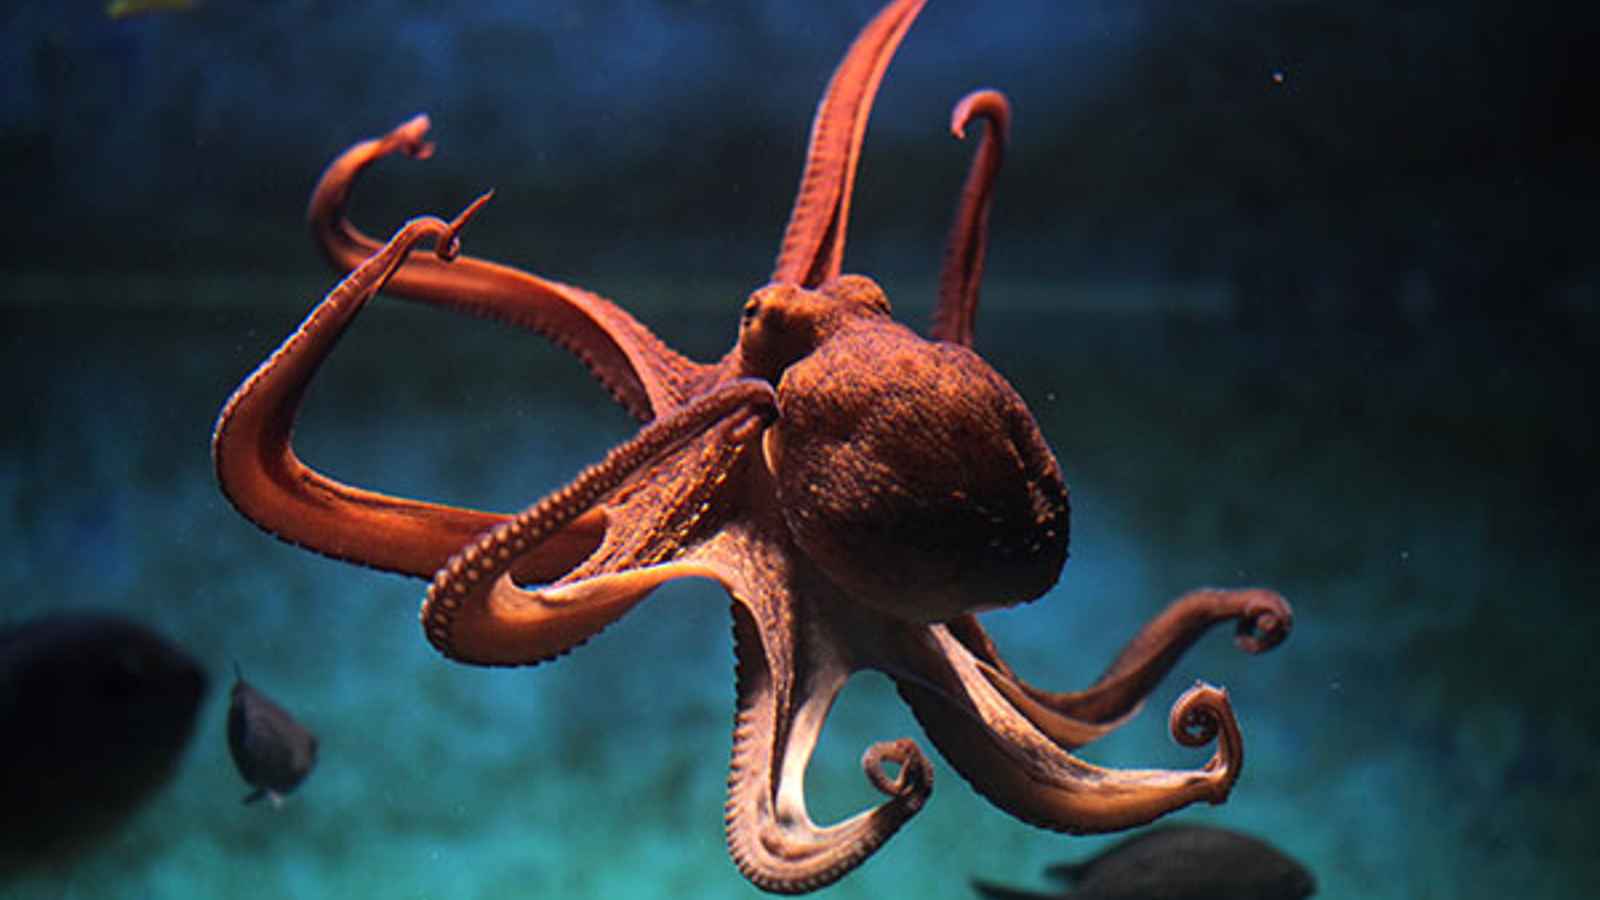 World Octopus Day 2023: Date, History, Facts about Octogenuses